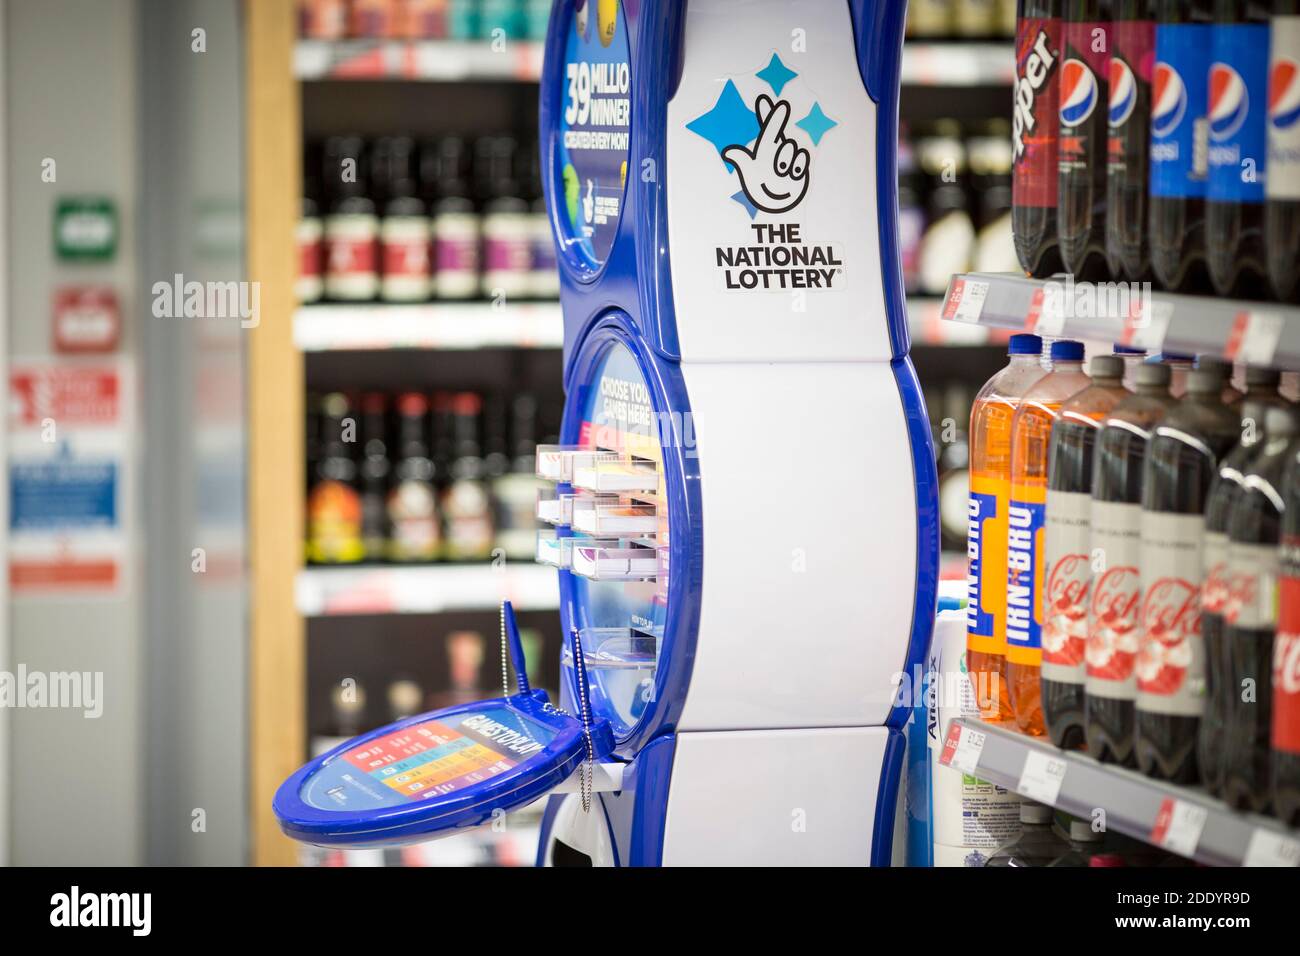 The National Lottery inside a co-op store Stock Photo